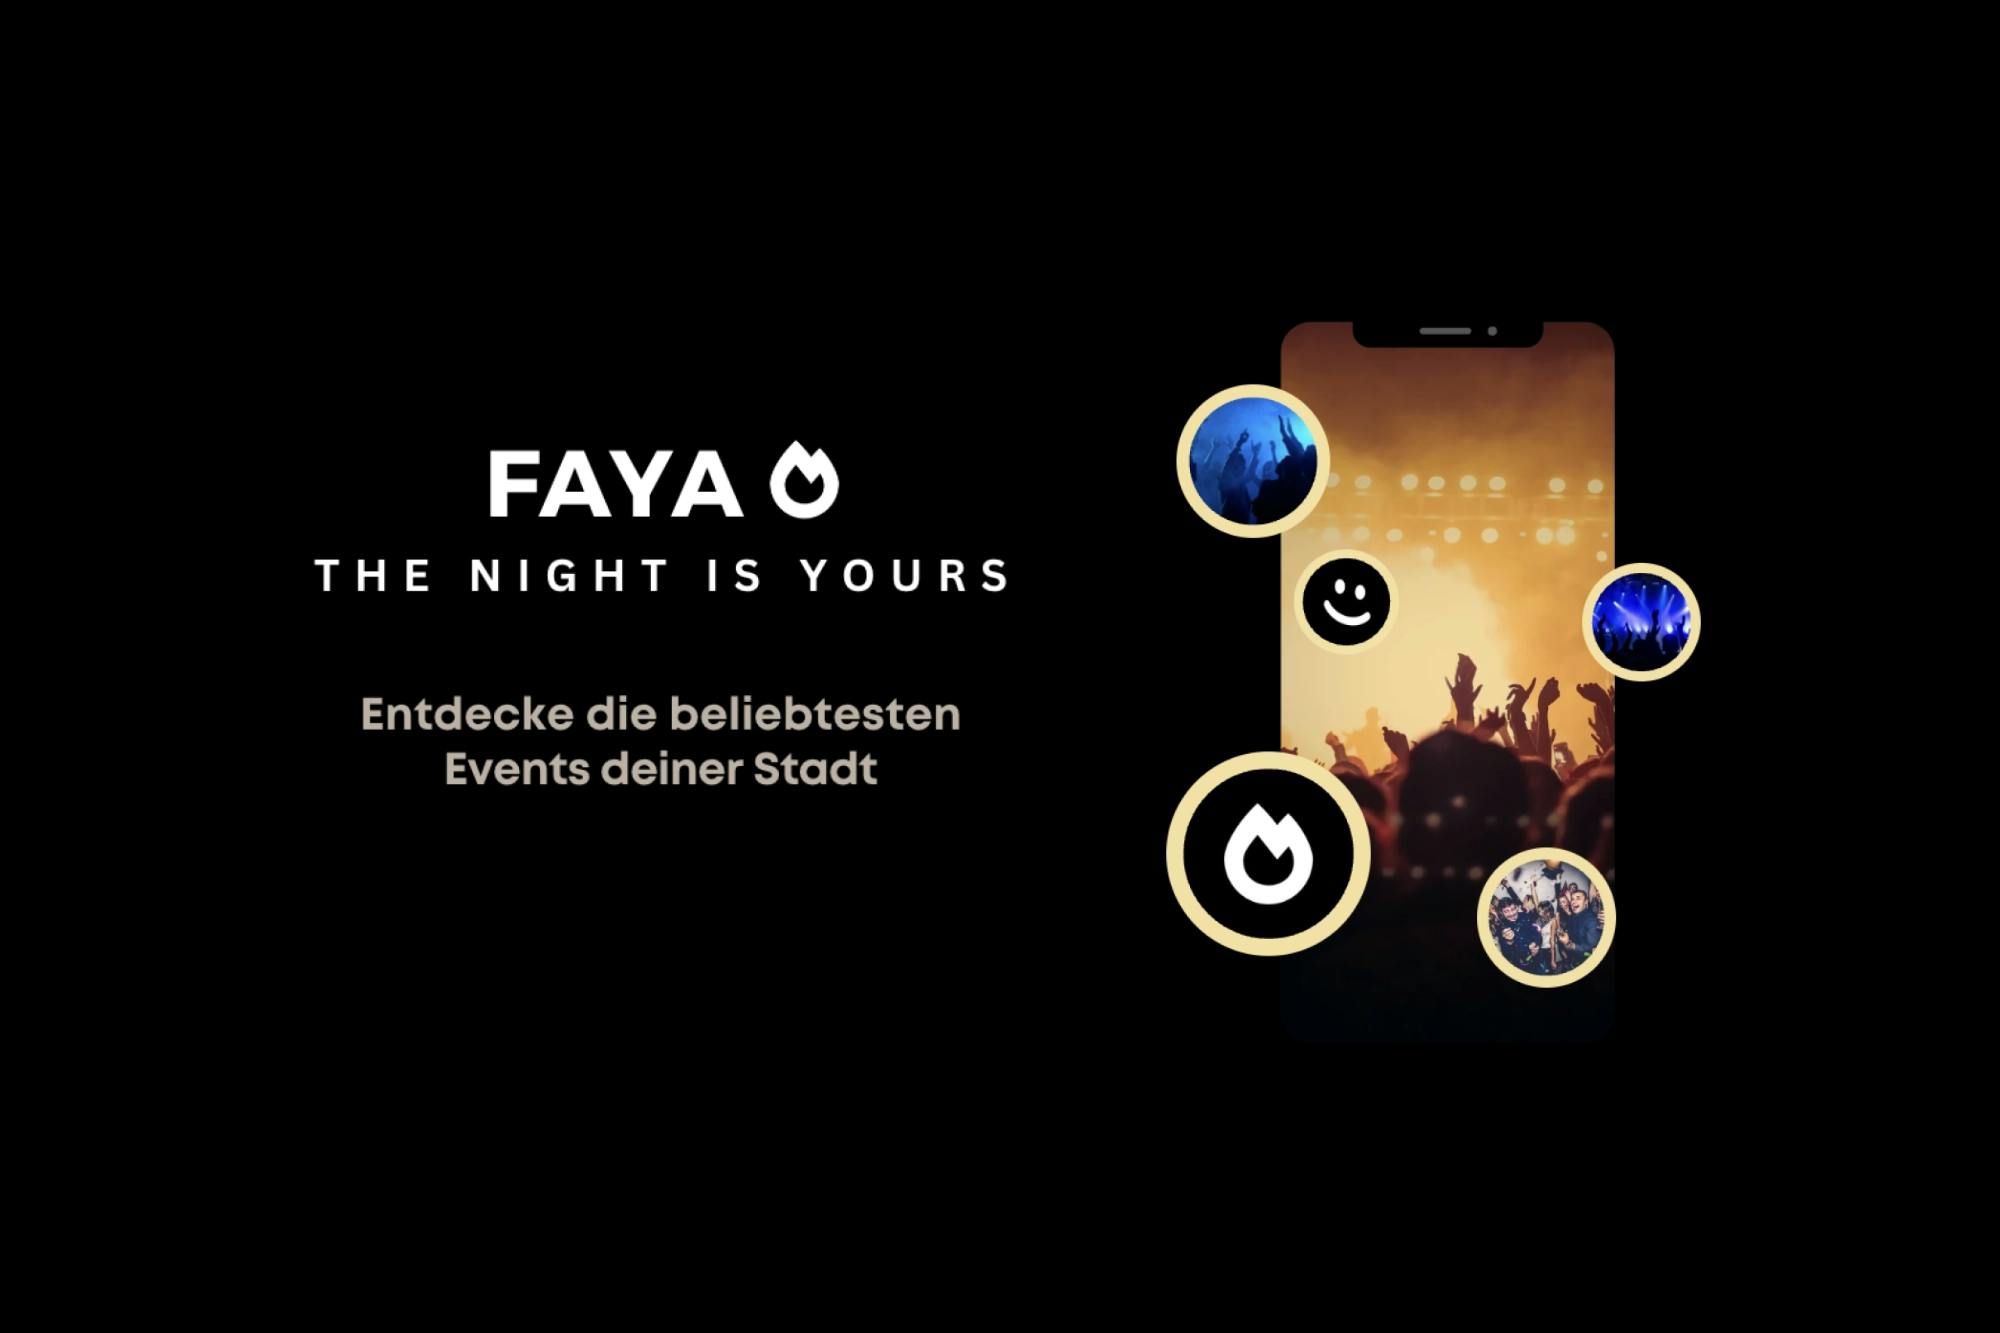 The Faya logo is shown on the left side of the image. On the right side, a smartphone displays the Faya app.